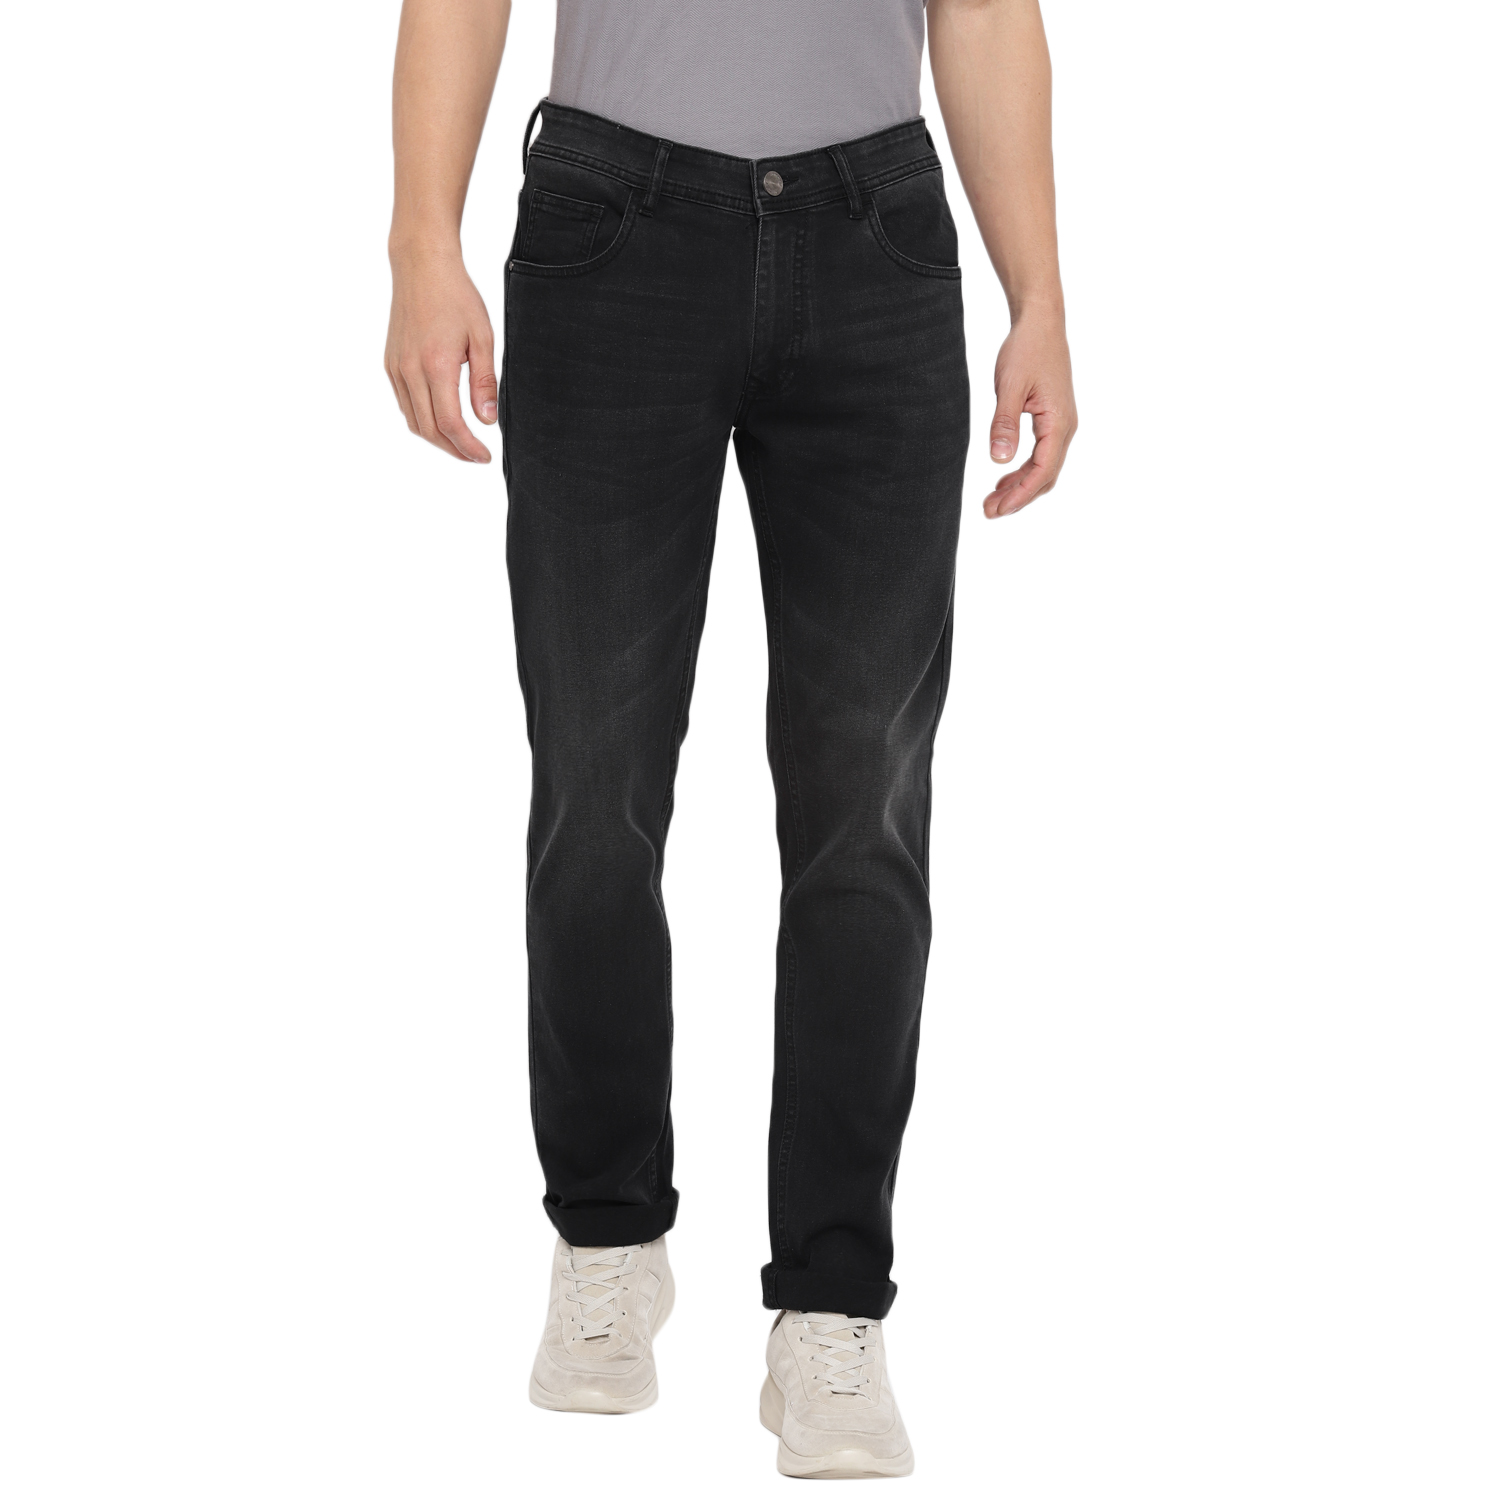 Redchief Black Narrow-Fit Jeans For Men